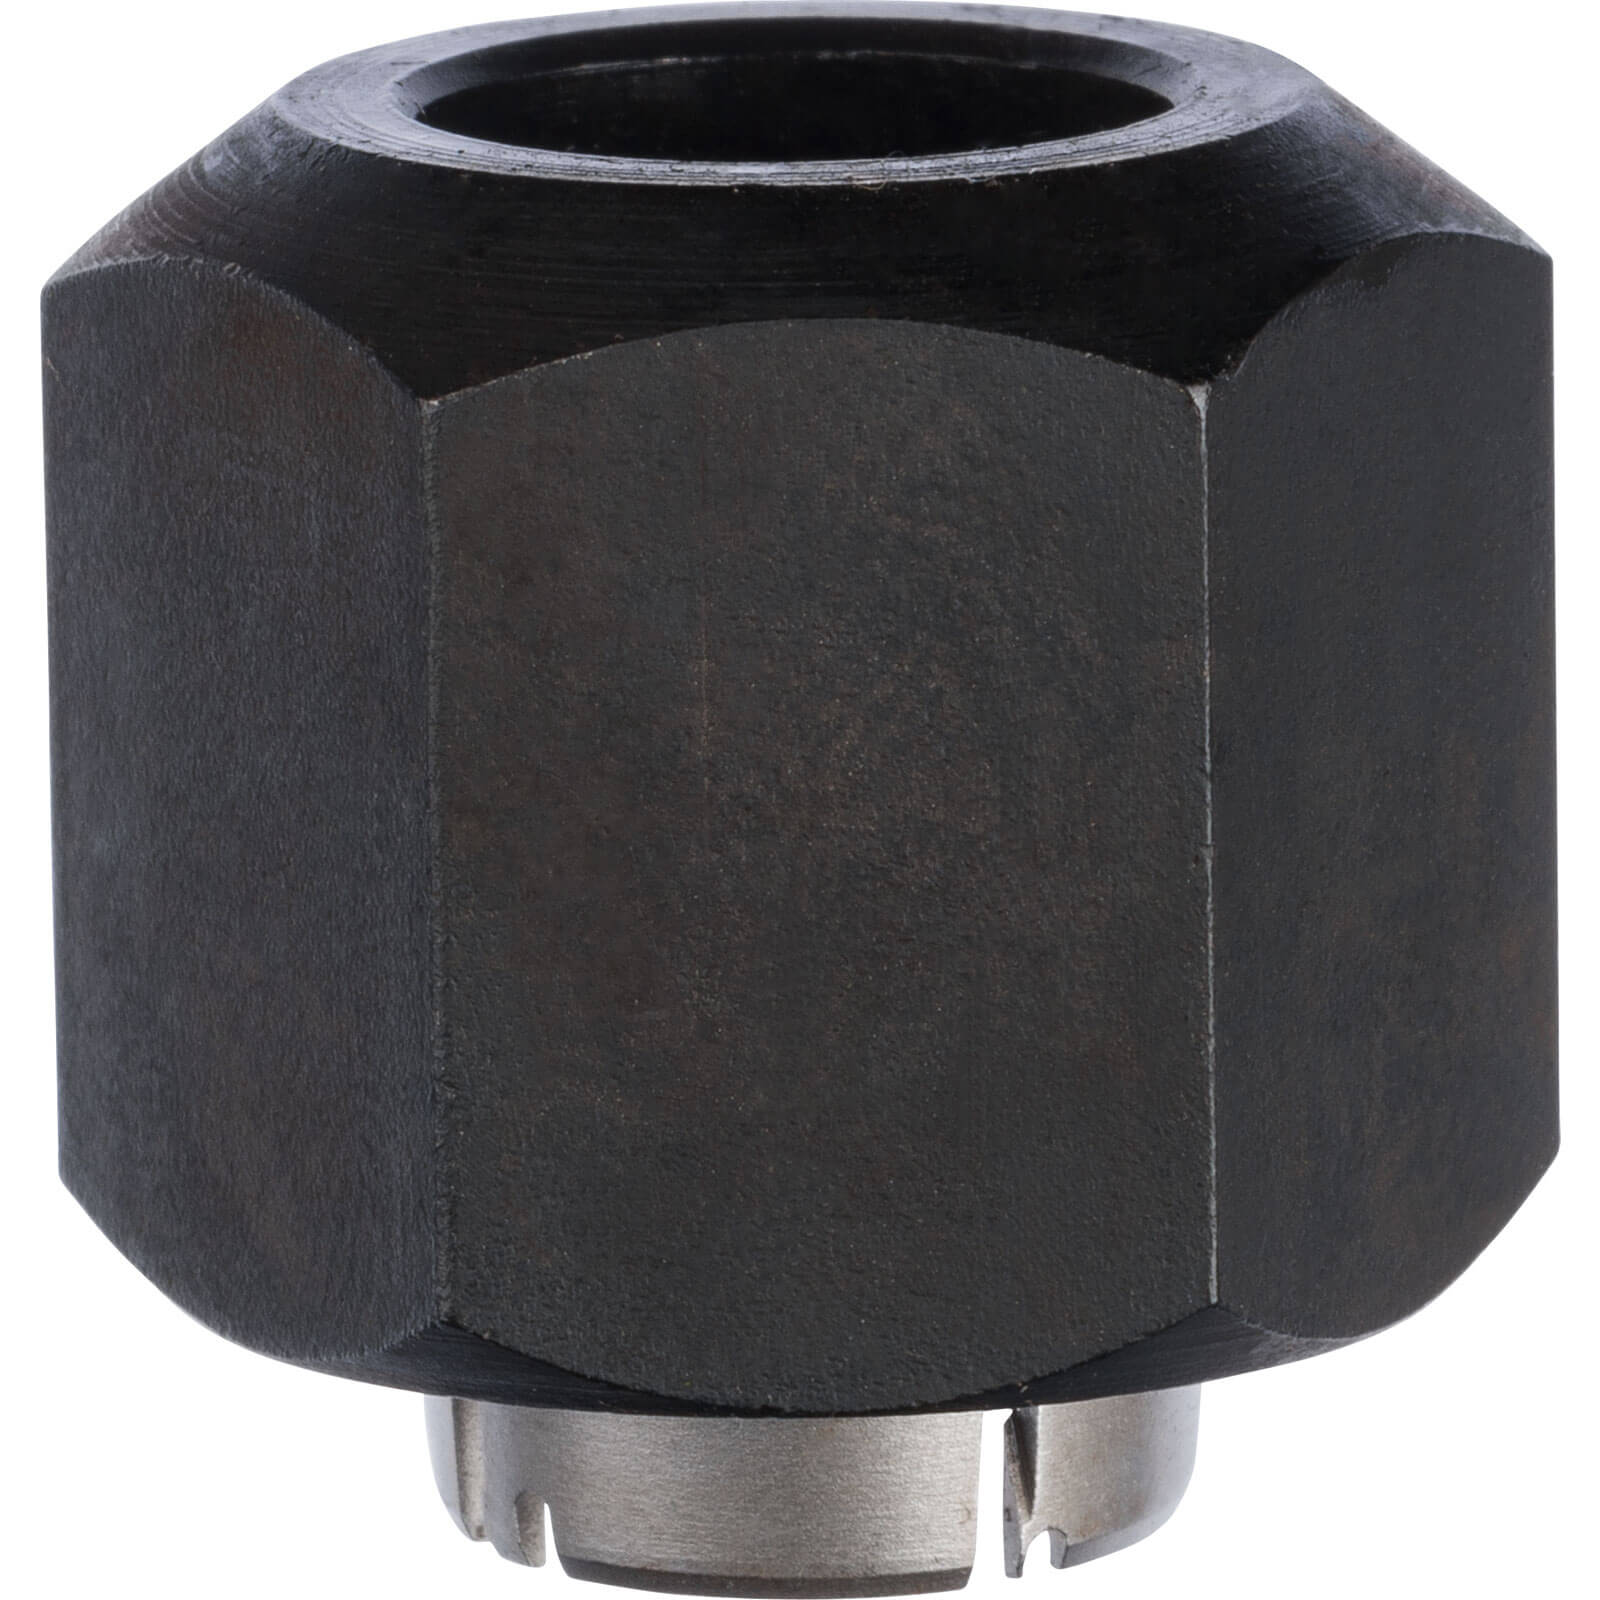 Image of Bosch Router Collet 1/2"